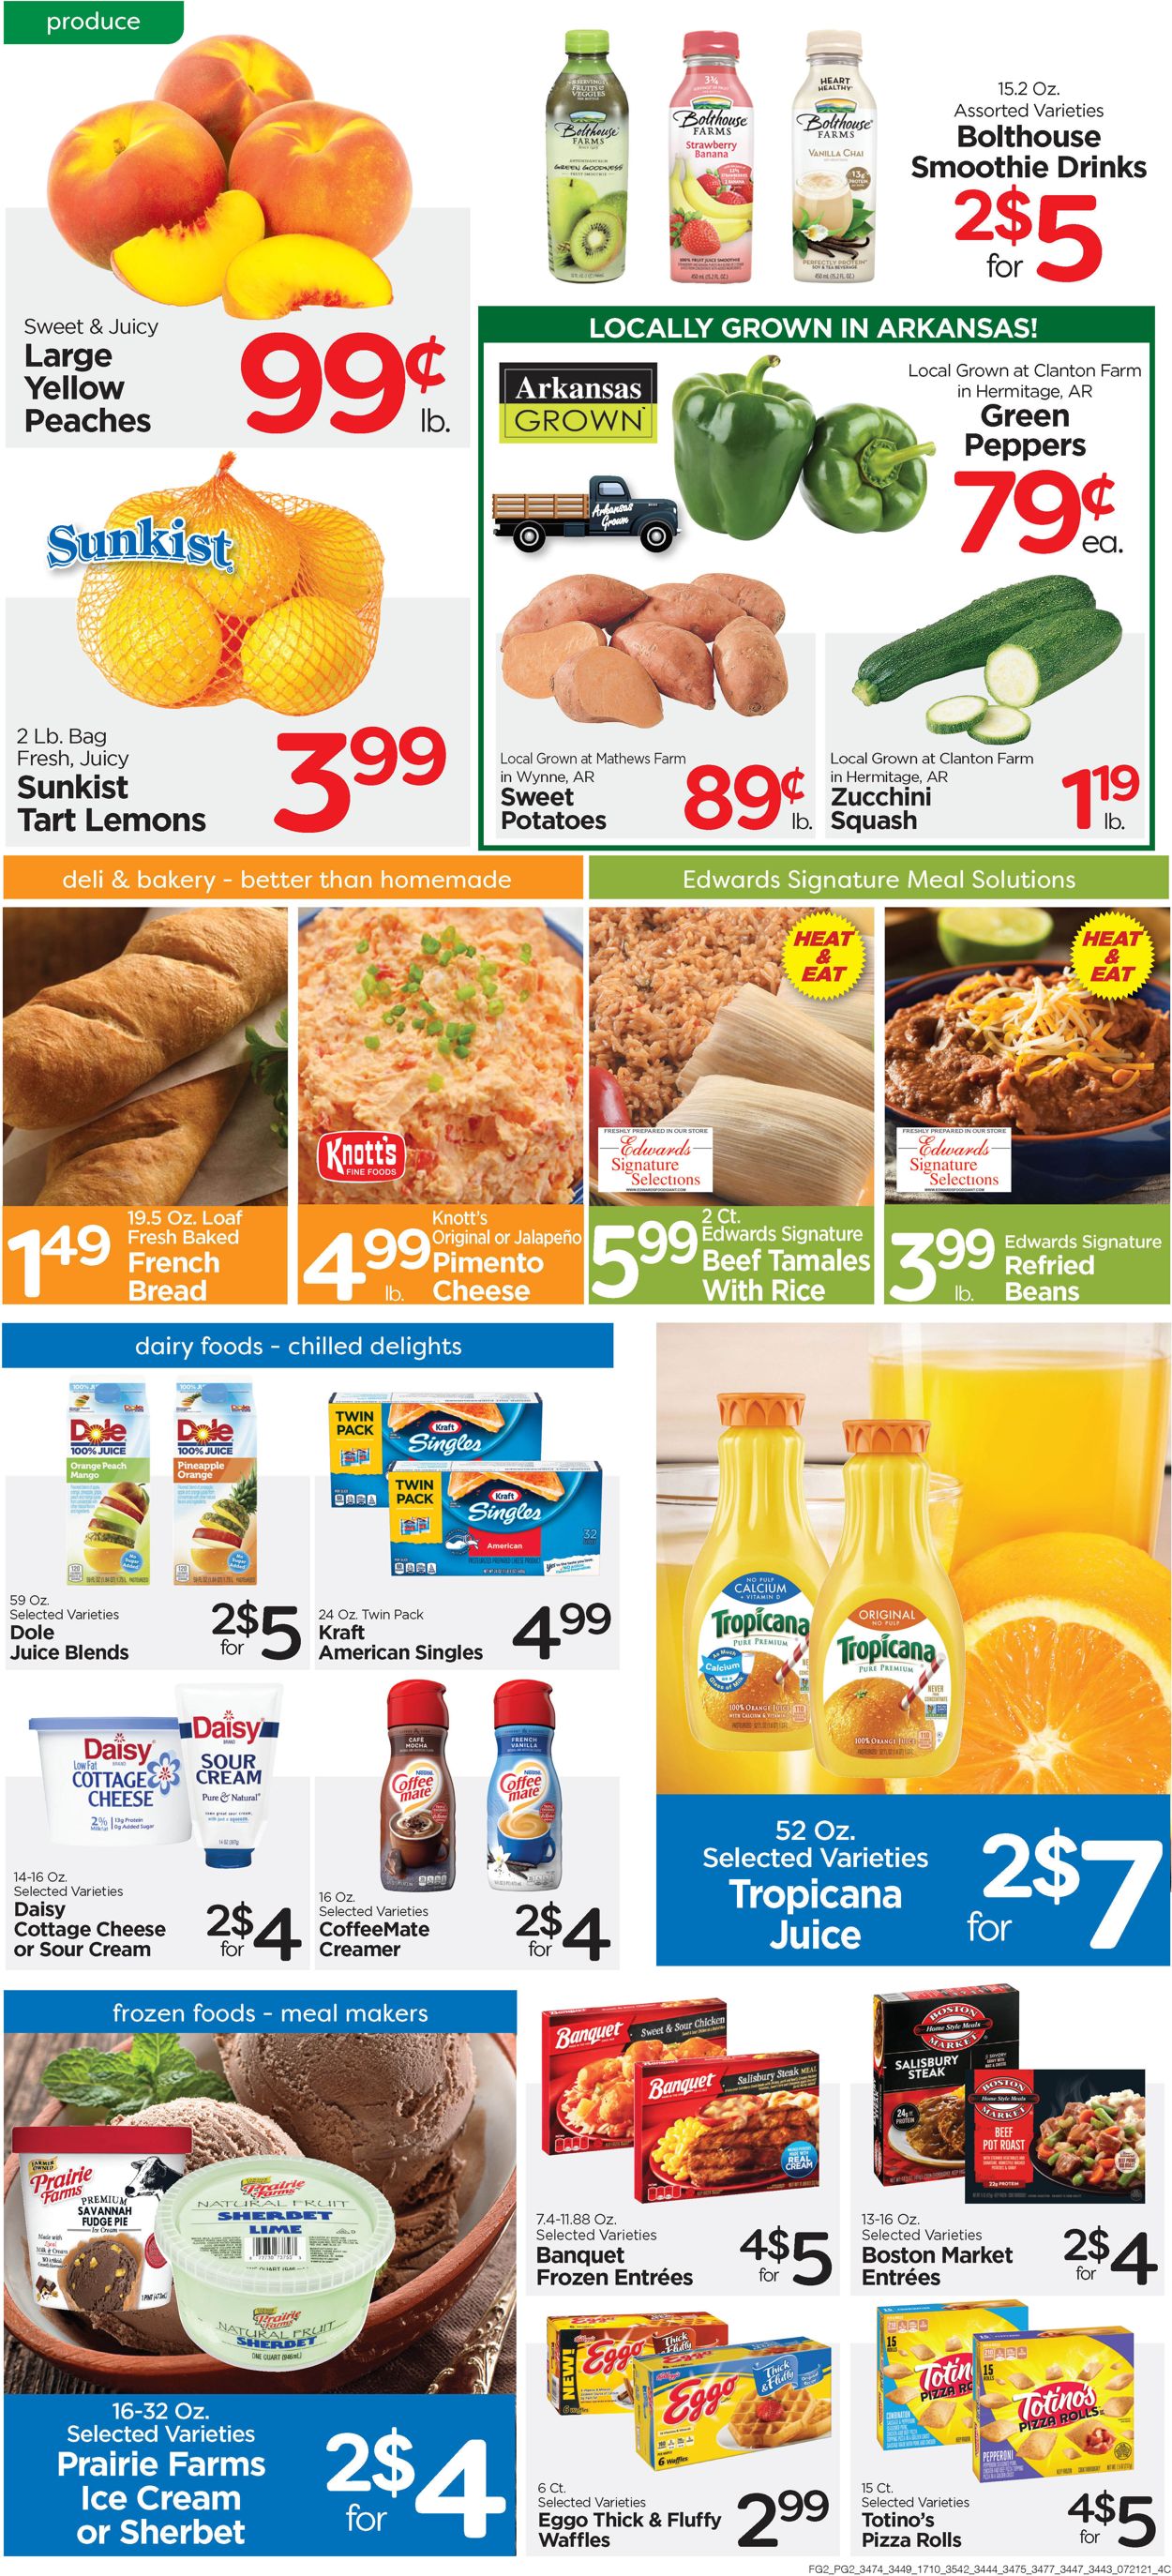 Edwards Food Giant Ad from 07/21/2021